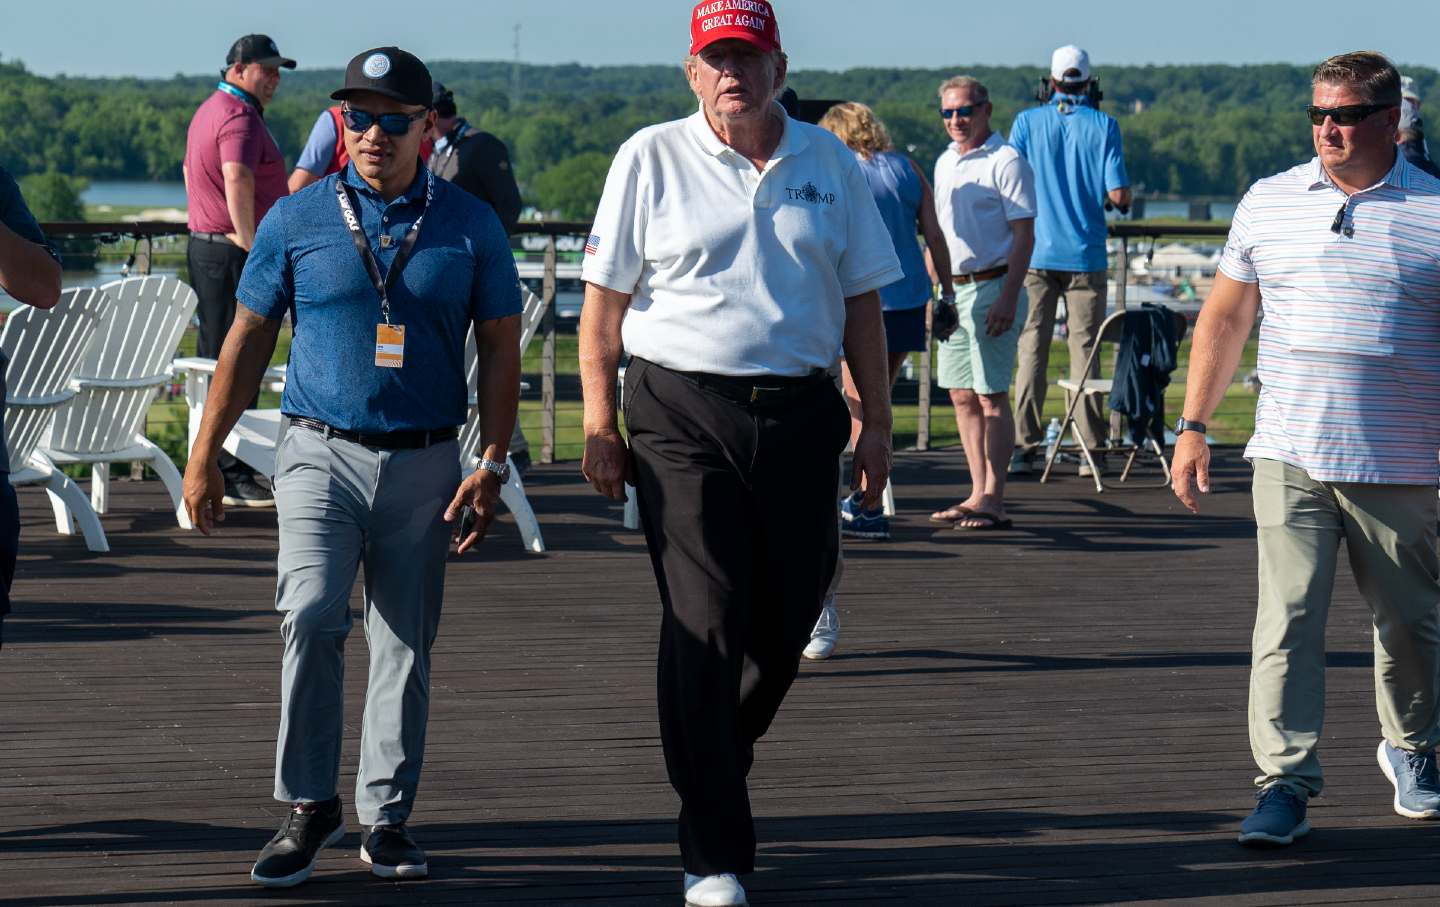 Walt Nauta, who was indicted on federal charges alongside Donald Trump, walks with his boss during the first round of the LIV Golf at Trump National Golf Club, Friday, May 26, 2023, in Sterling, Va.